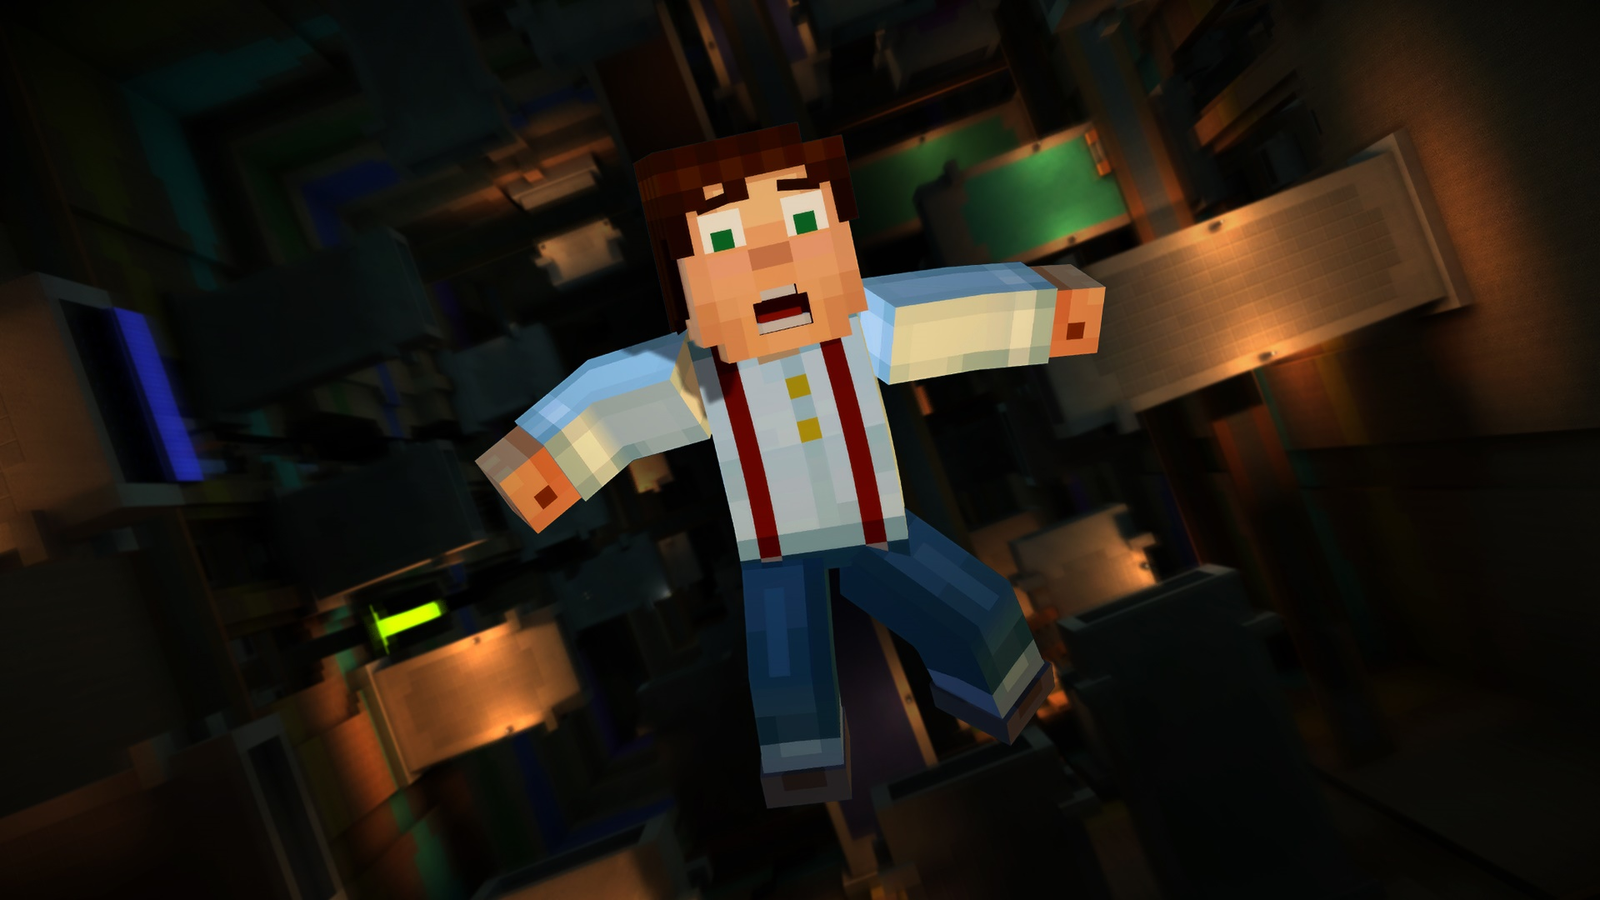 Exclusive: Netflix to bring Minecraft: Story Mode to service - but